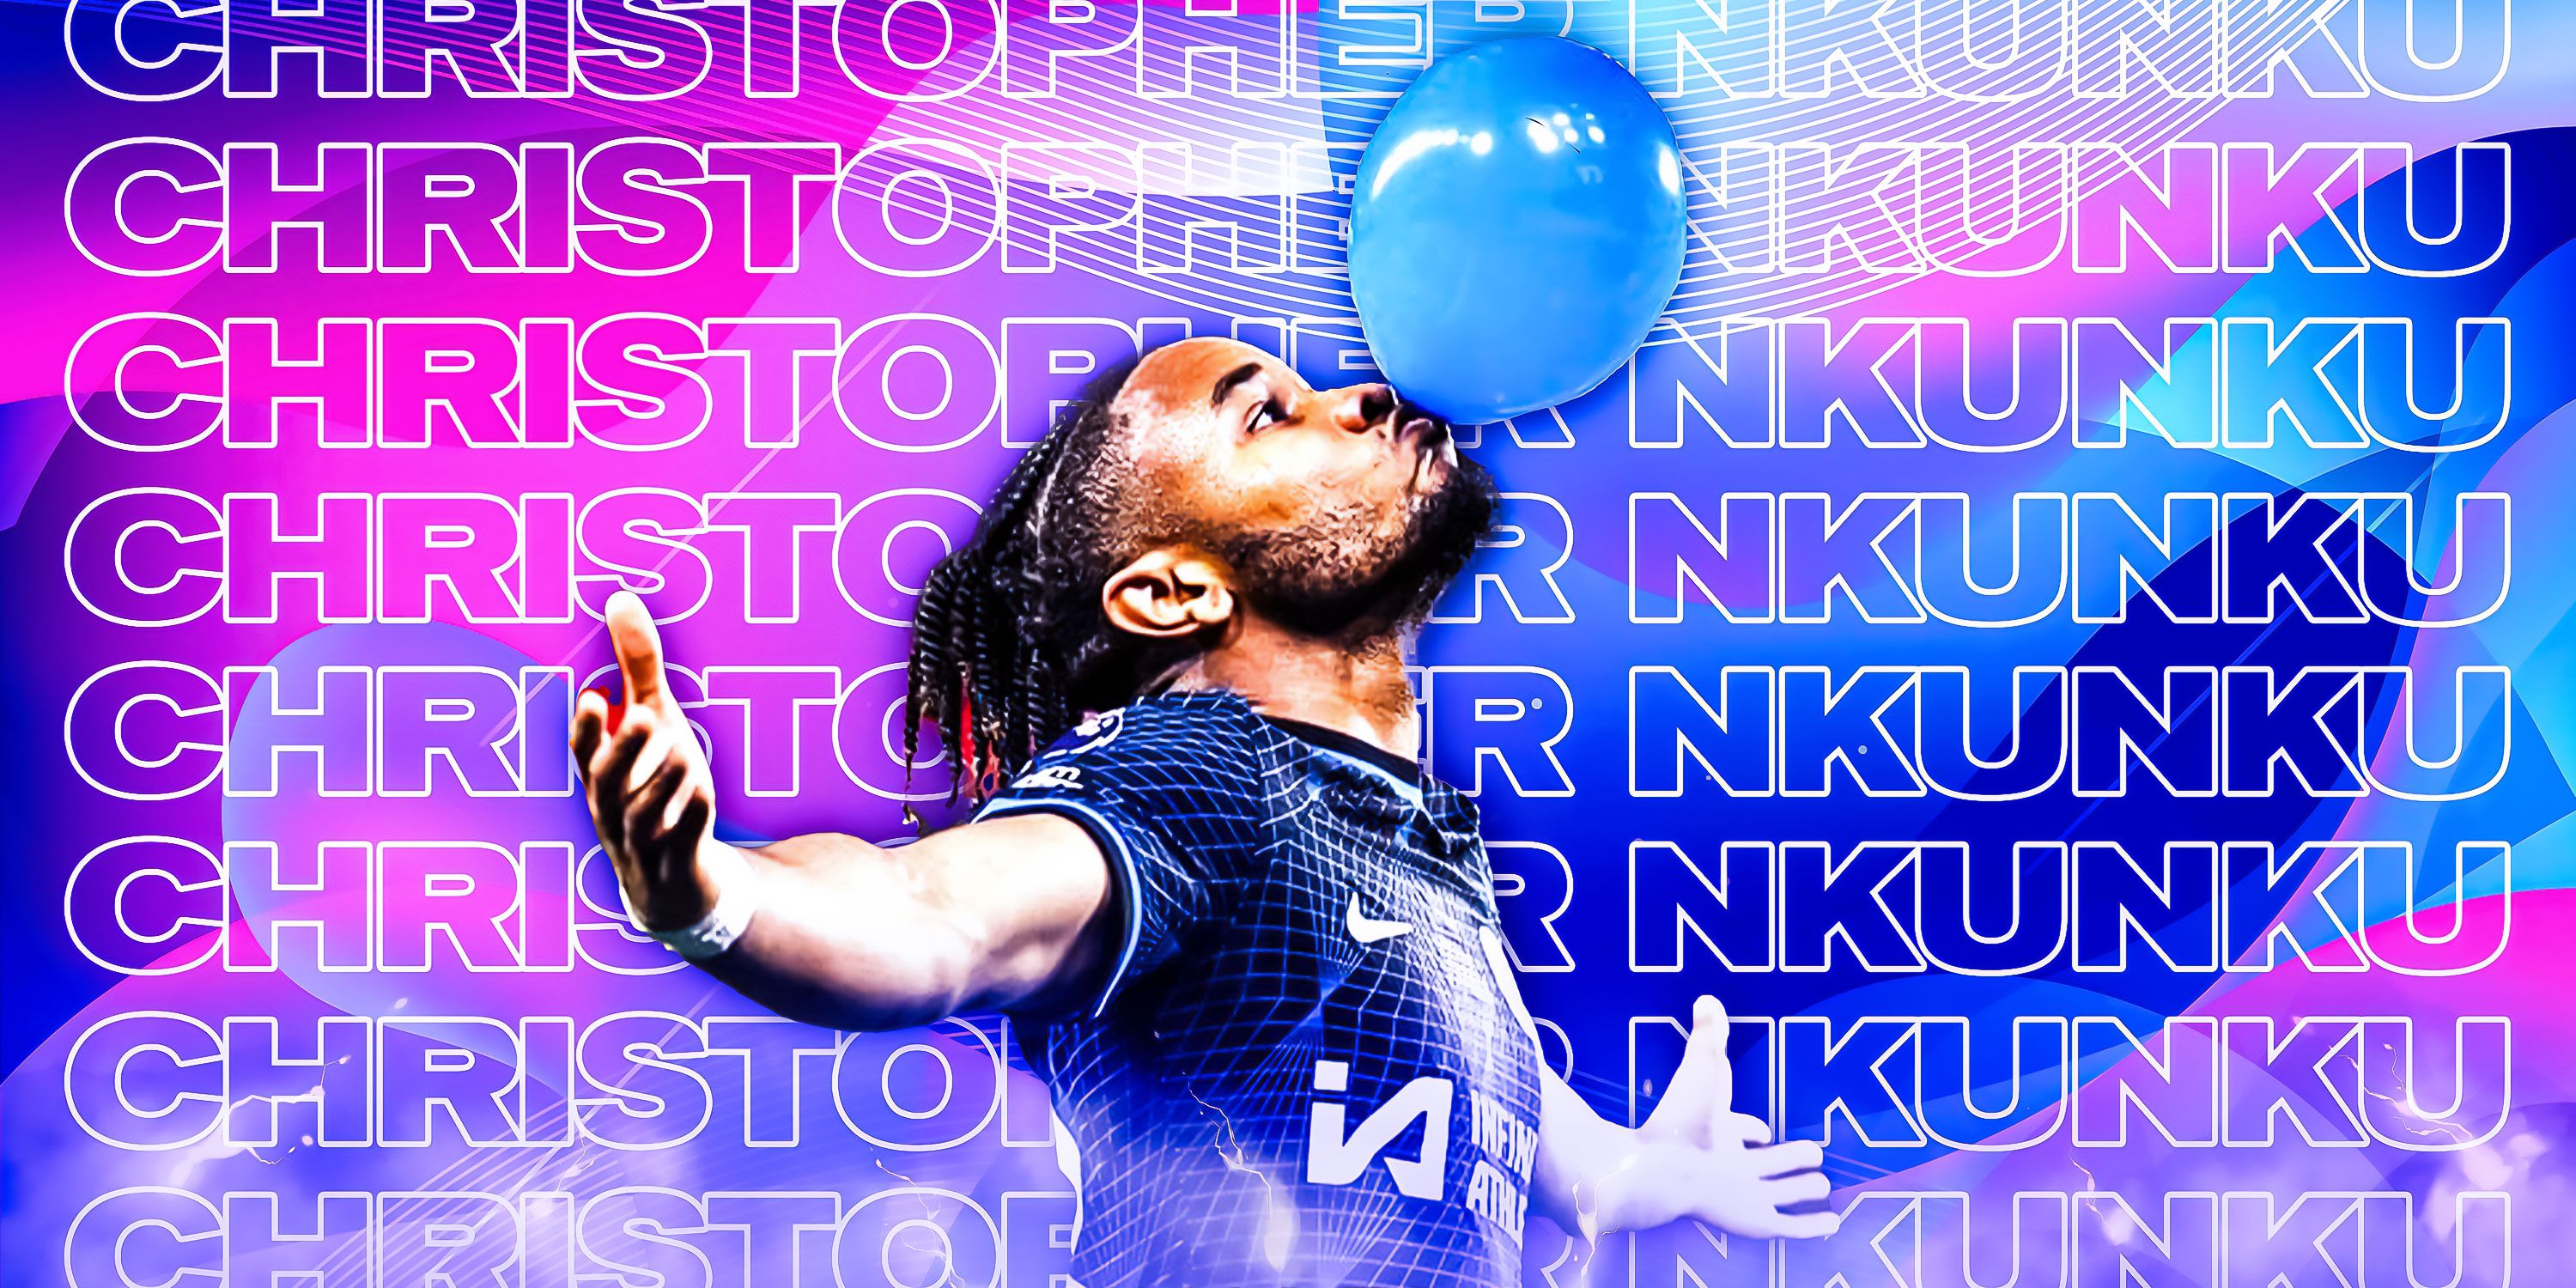 Why-Christopher-Nkunku-celebrates-with-a-balloon